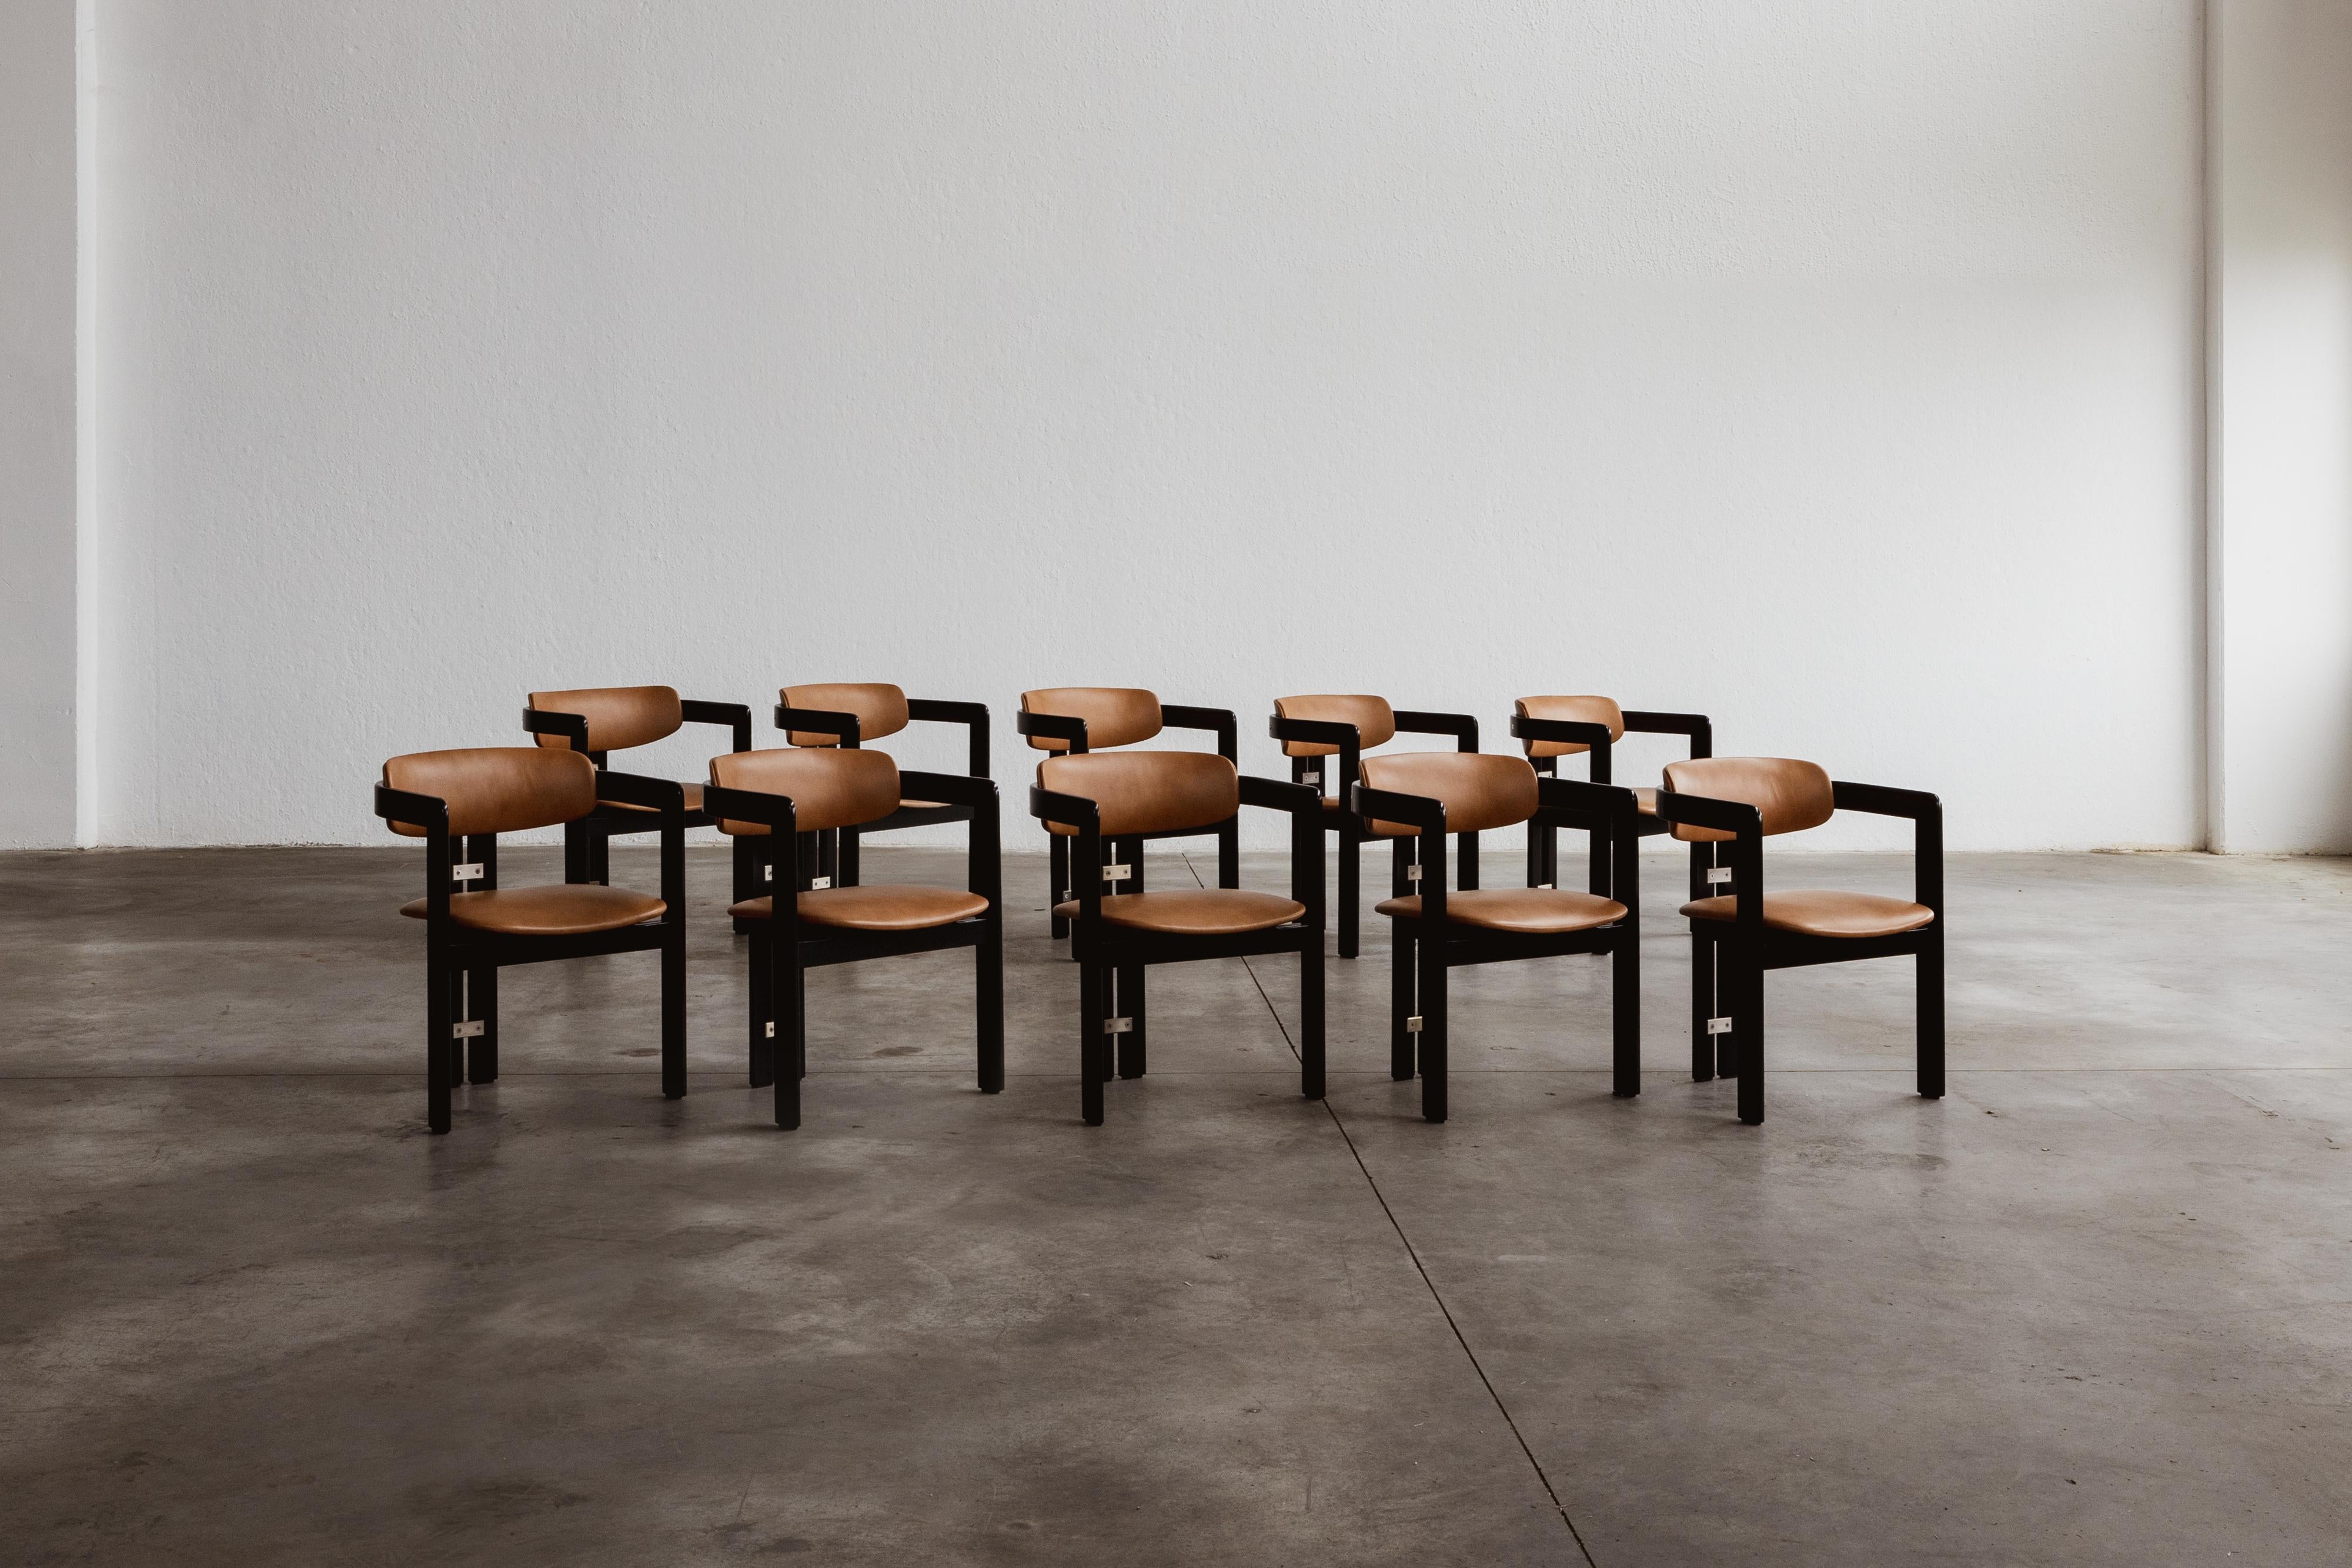 Augusto Savini “Pamplona” dining chairs for Pozzi, black framework and ranch leather, Italy, 1965, set of ten.

In the realm of Italian craftsmanship, the Pamplona chairs by Augusto Savini for Pozzi stand as a symbol of architectural elegance.